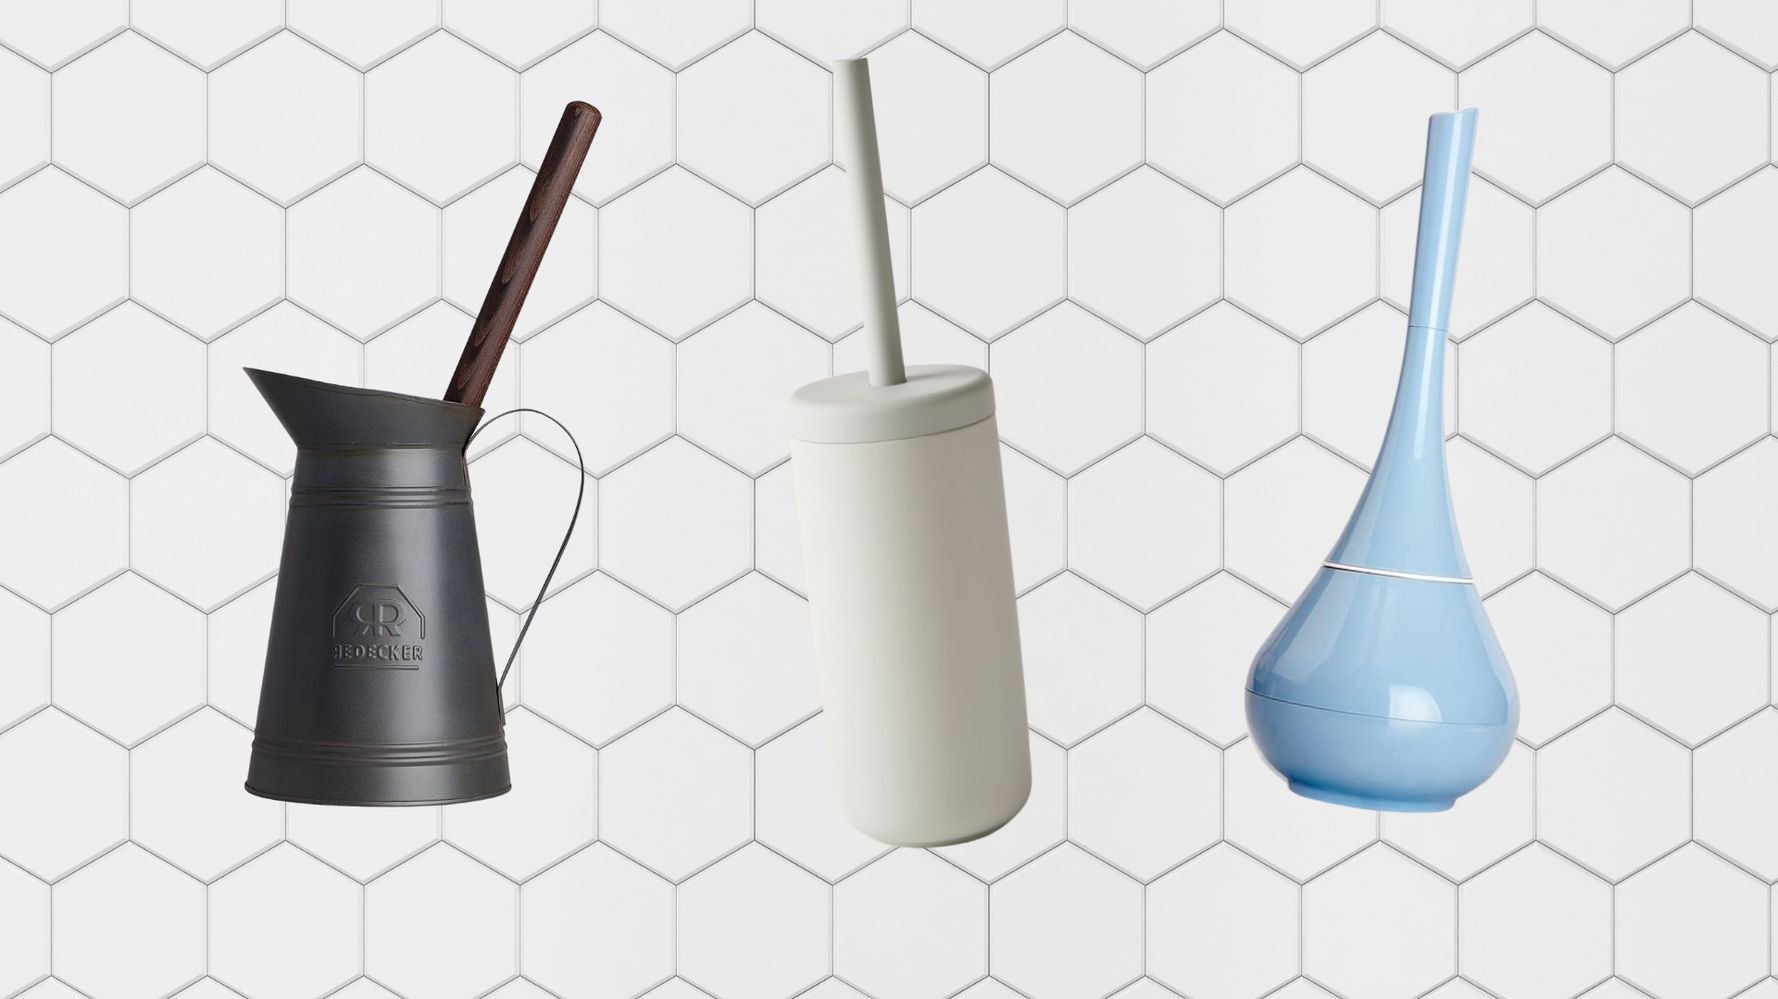 Good-Looking Toilet Brushes That Will Spruce Up Your Bathroom